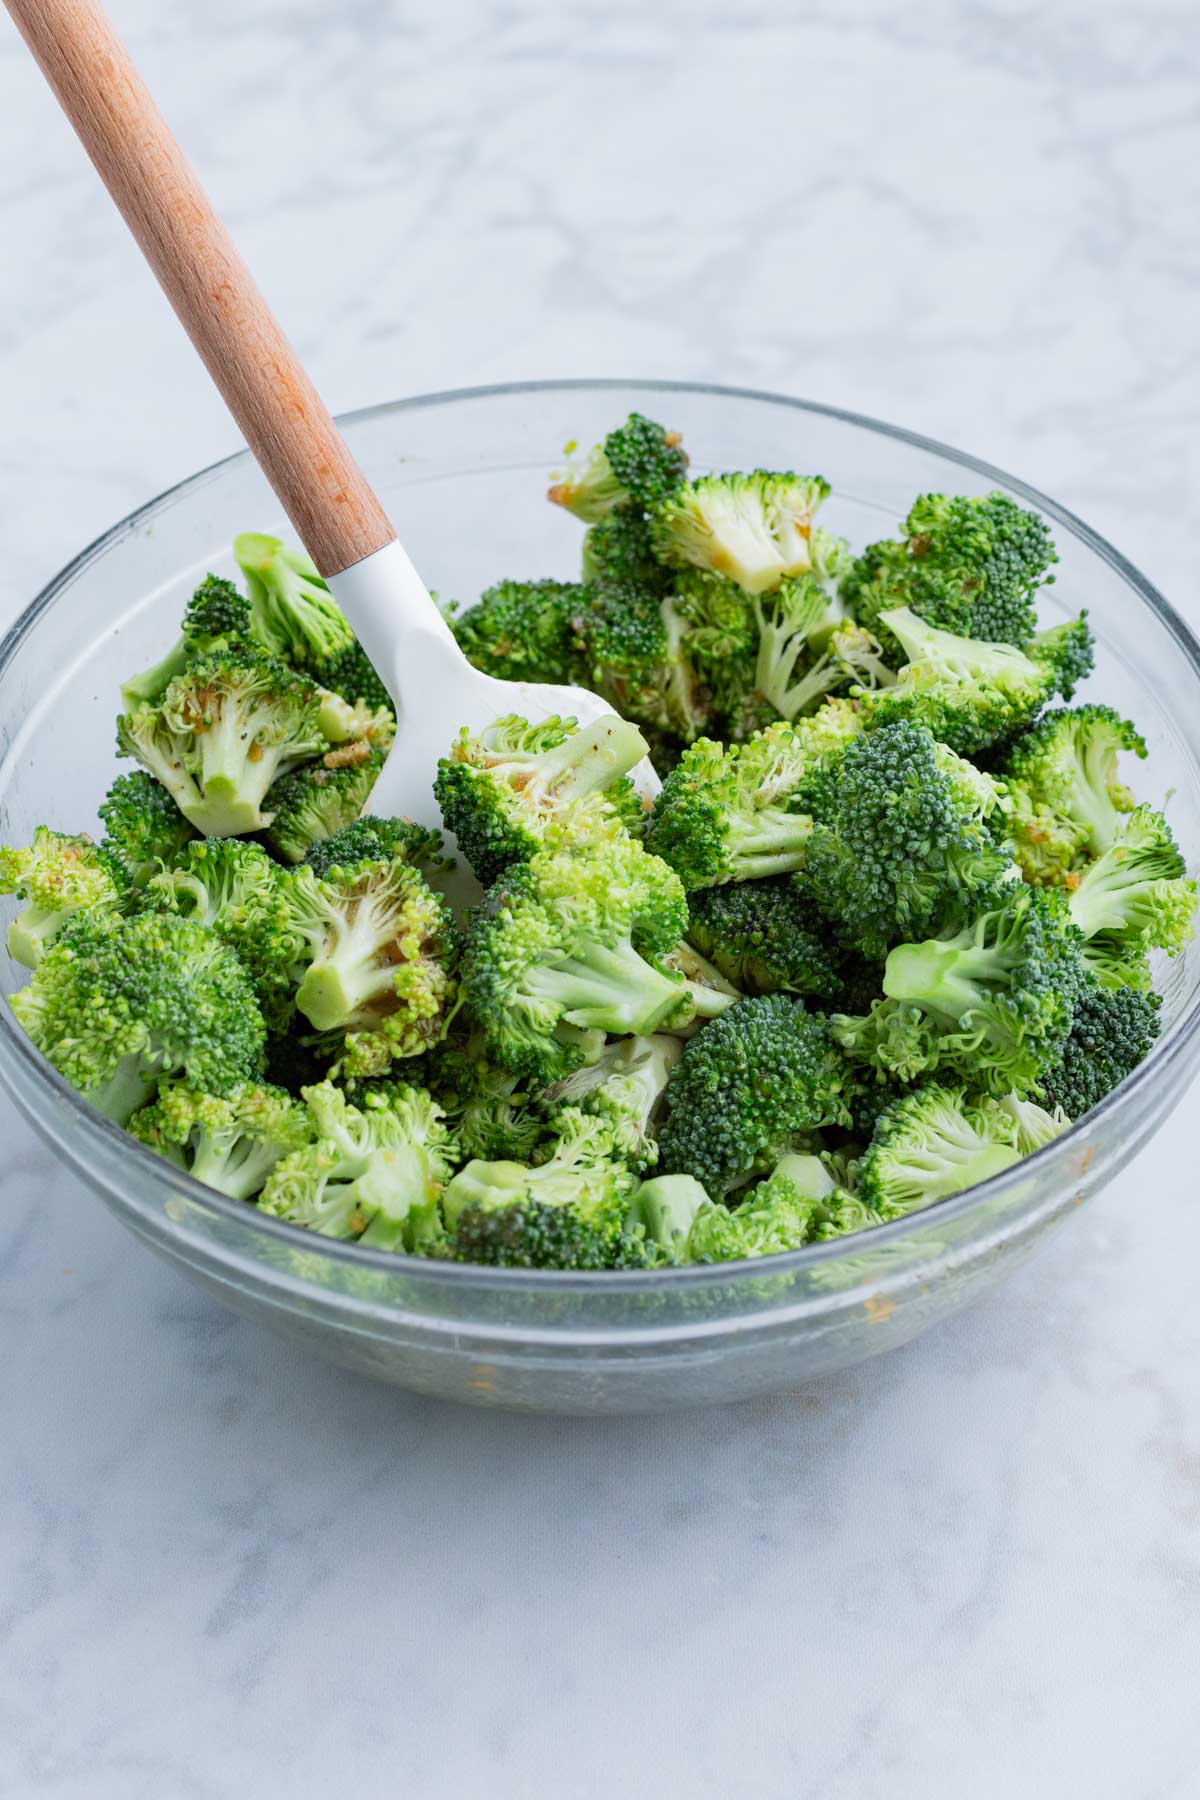 Chopped broccoli is stirred into the sauce.